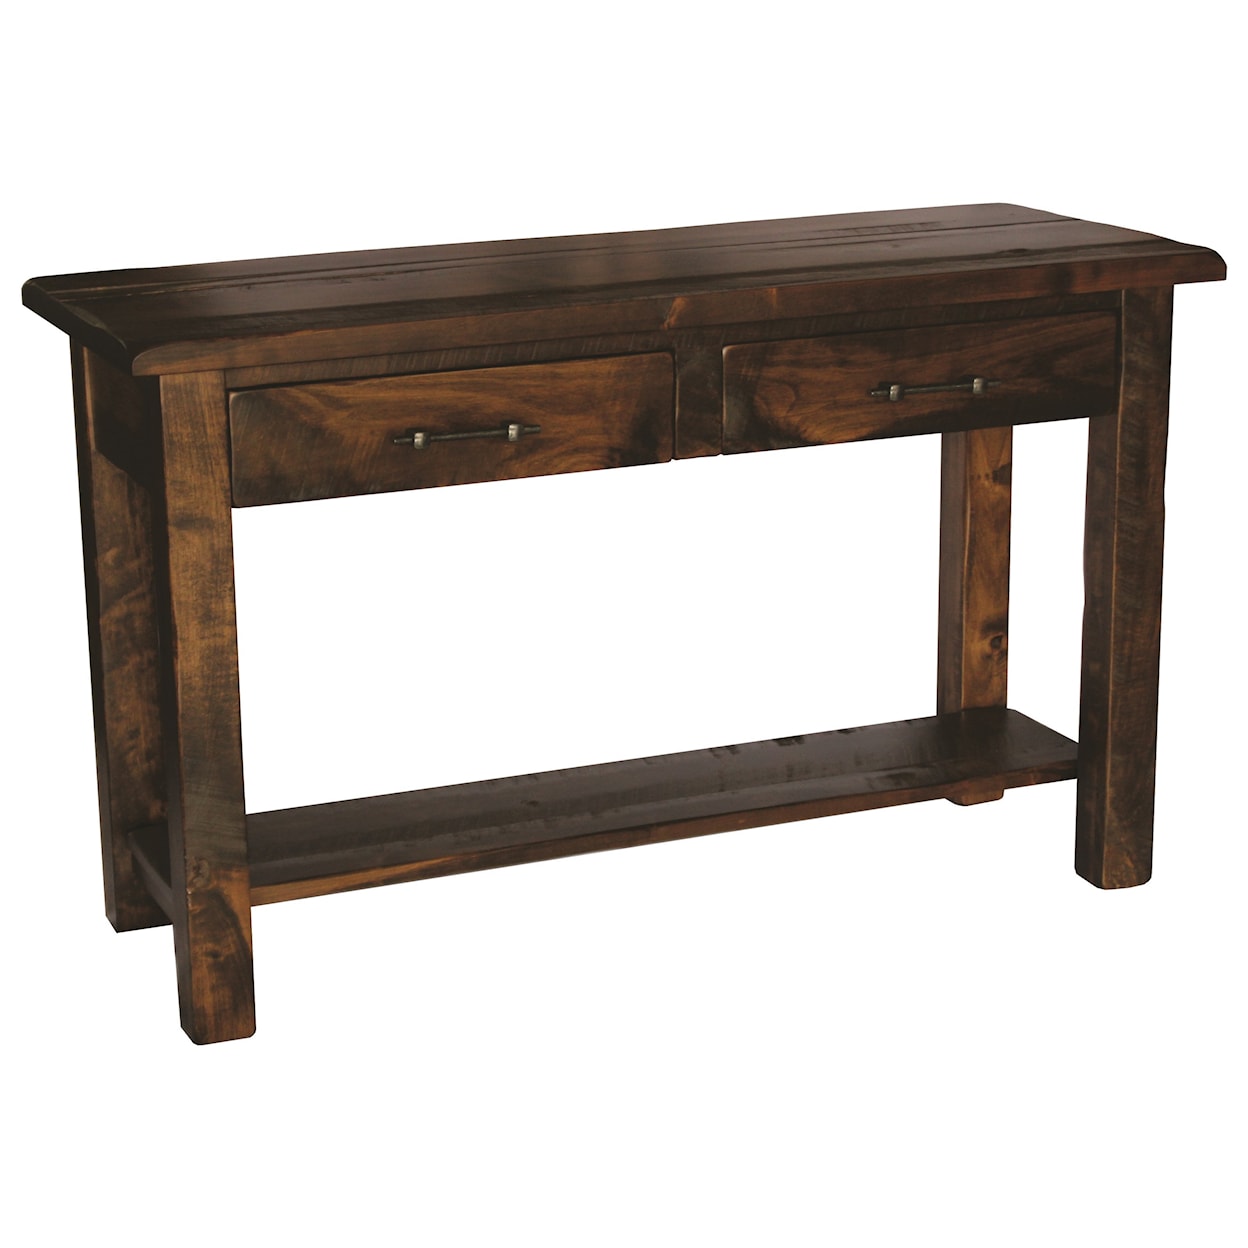 Ashery Woodworking Milltown Sofa Table